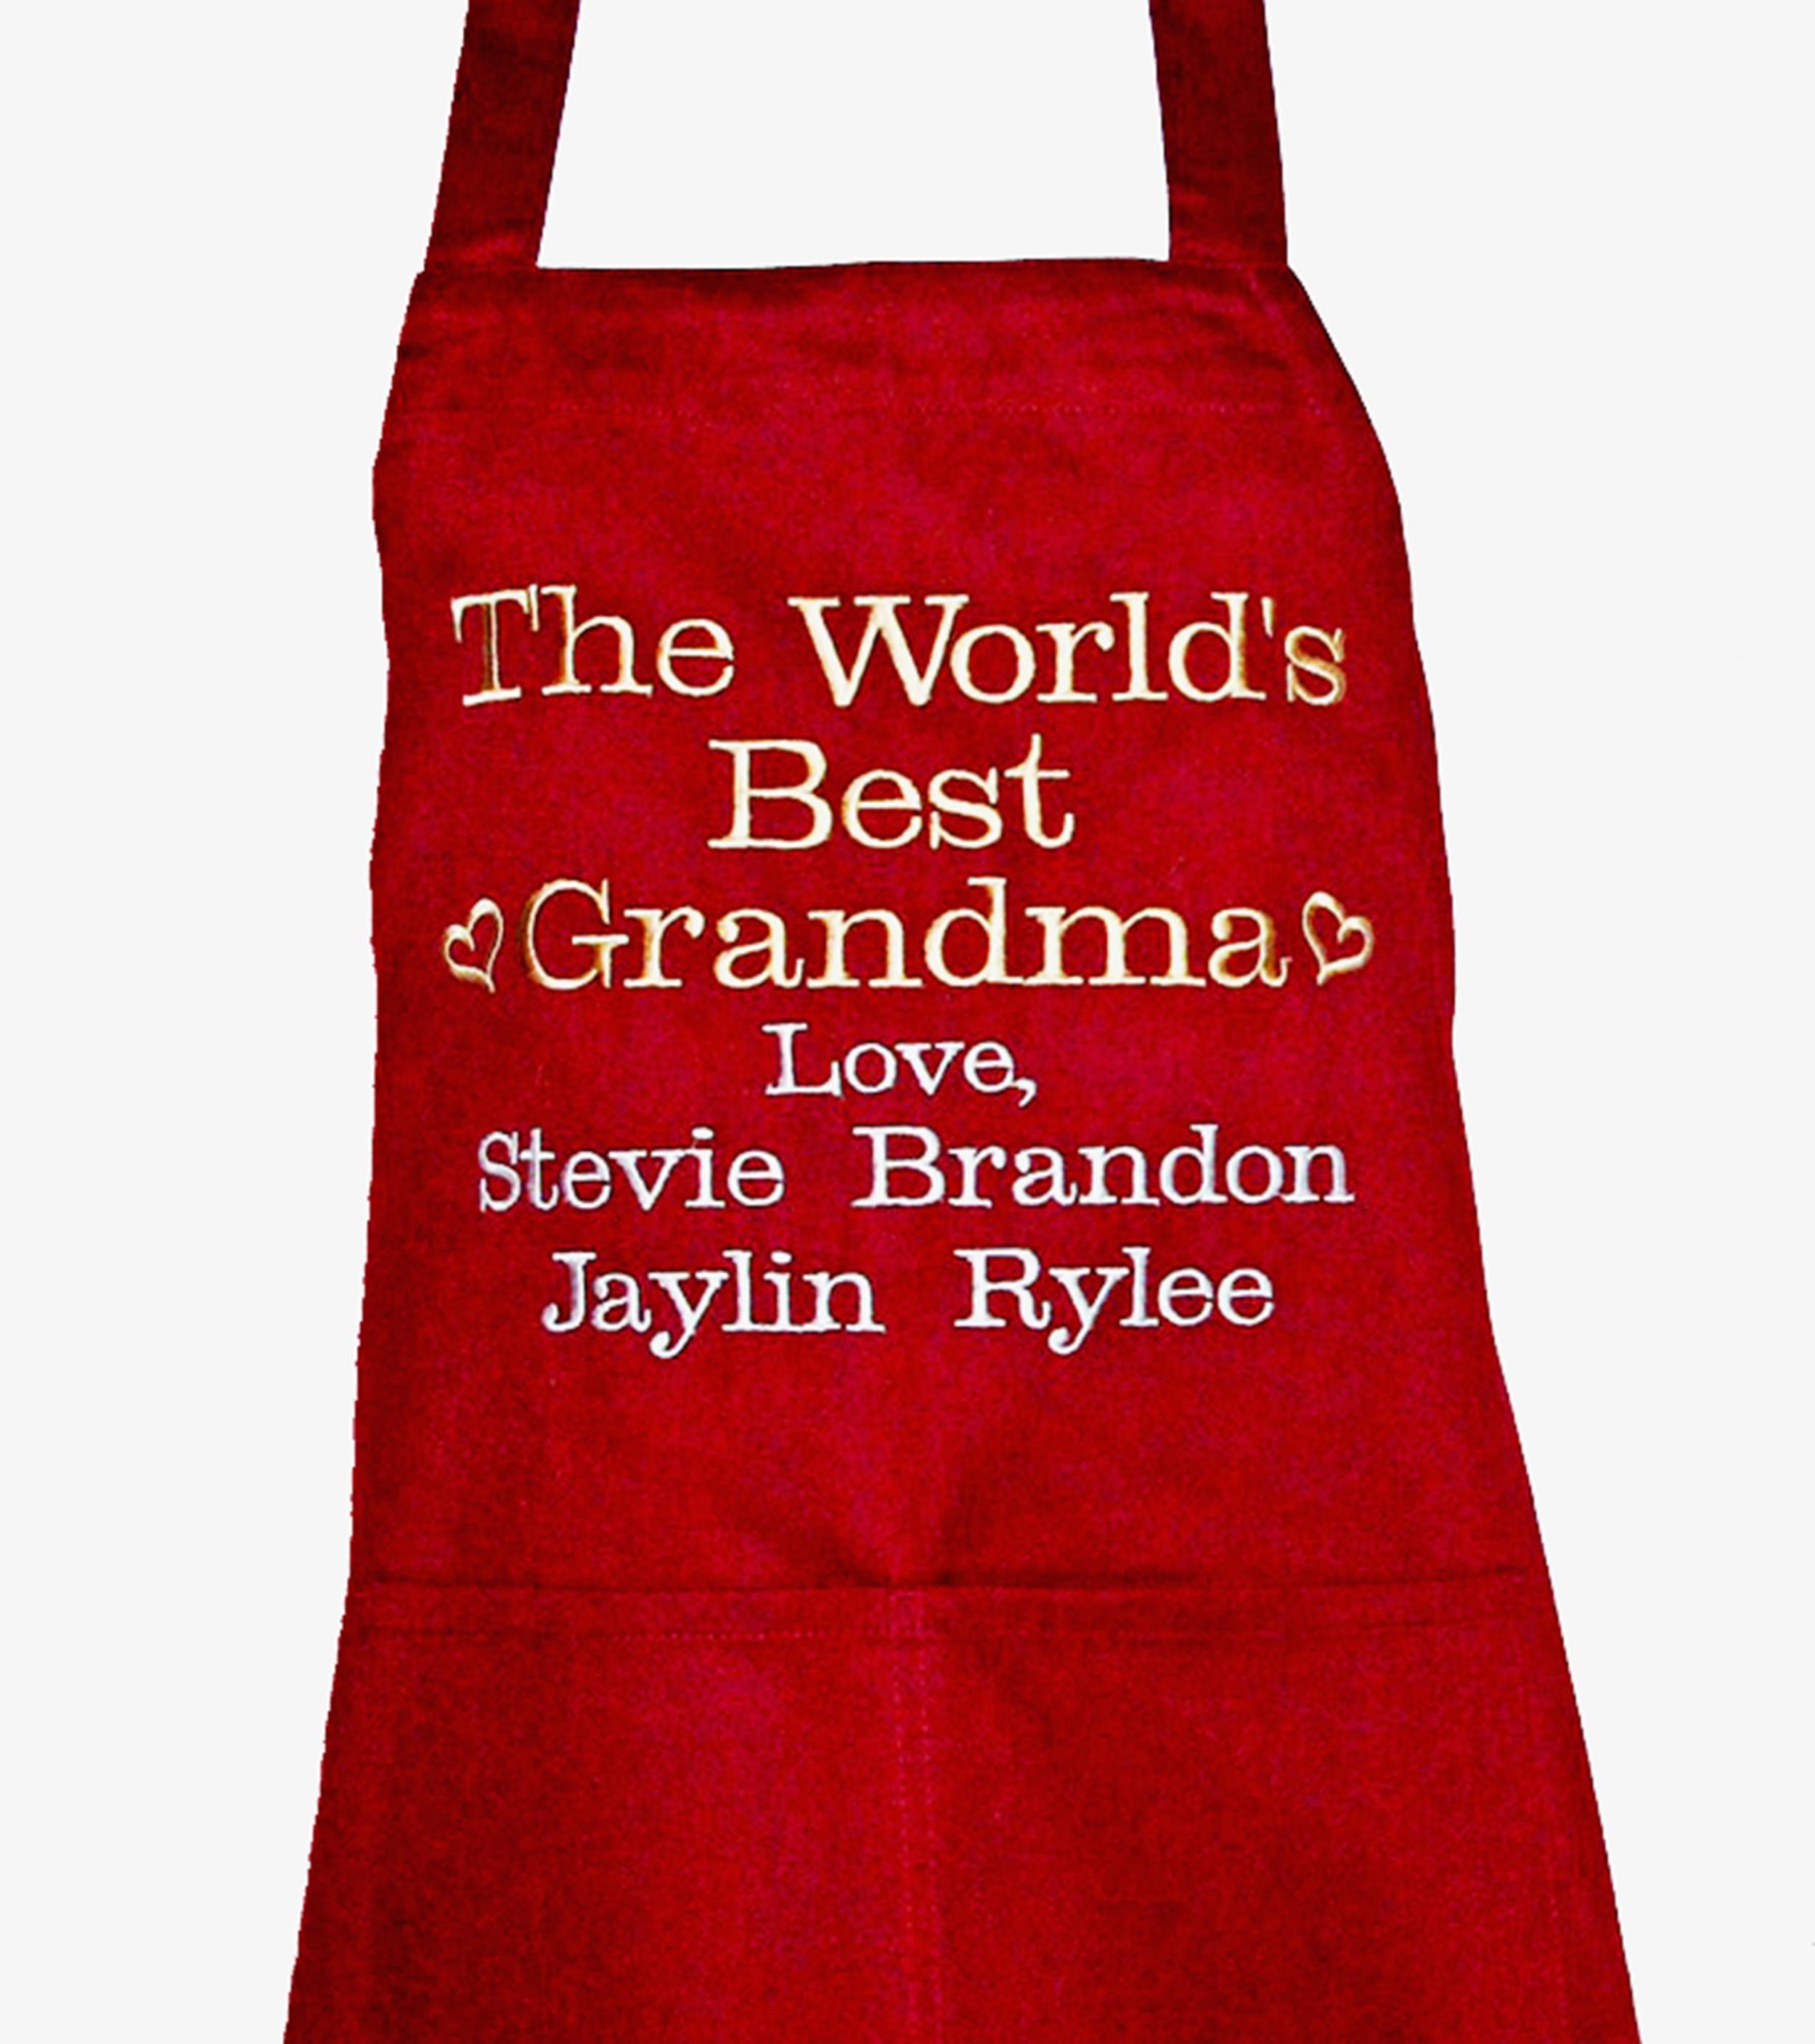 World's Best Mom Apron With Four Kids Names, AGFT 190